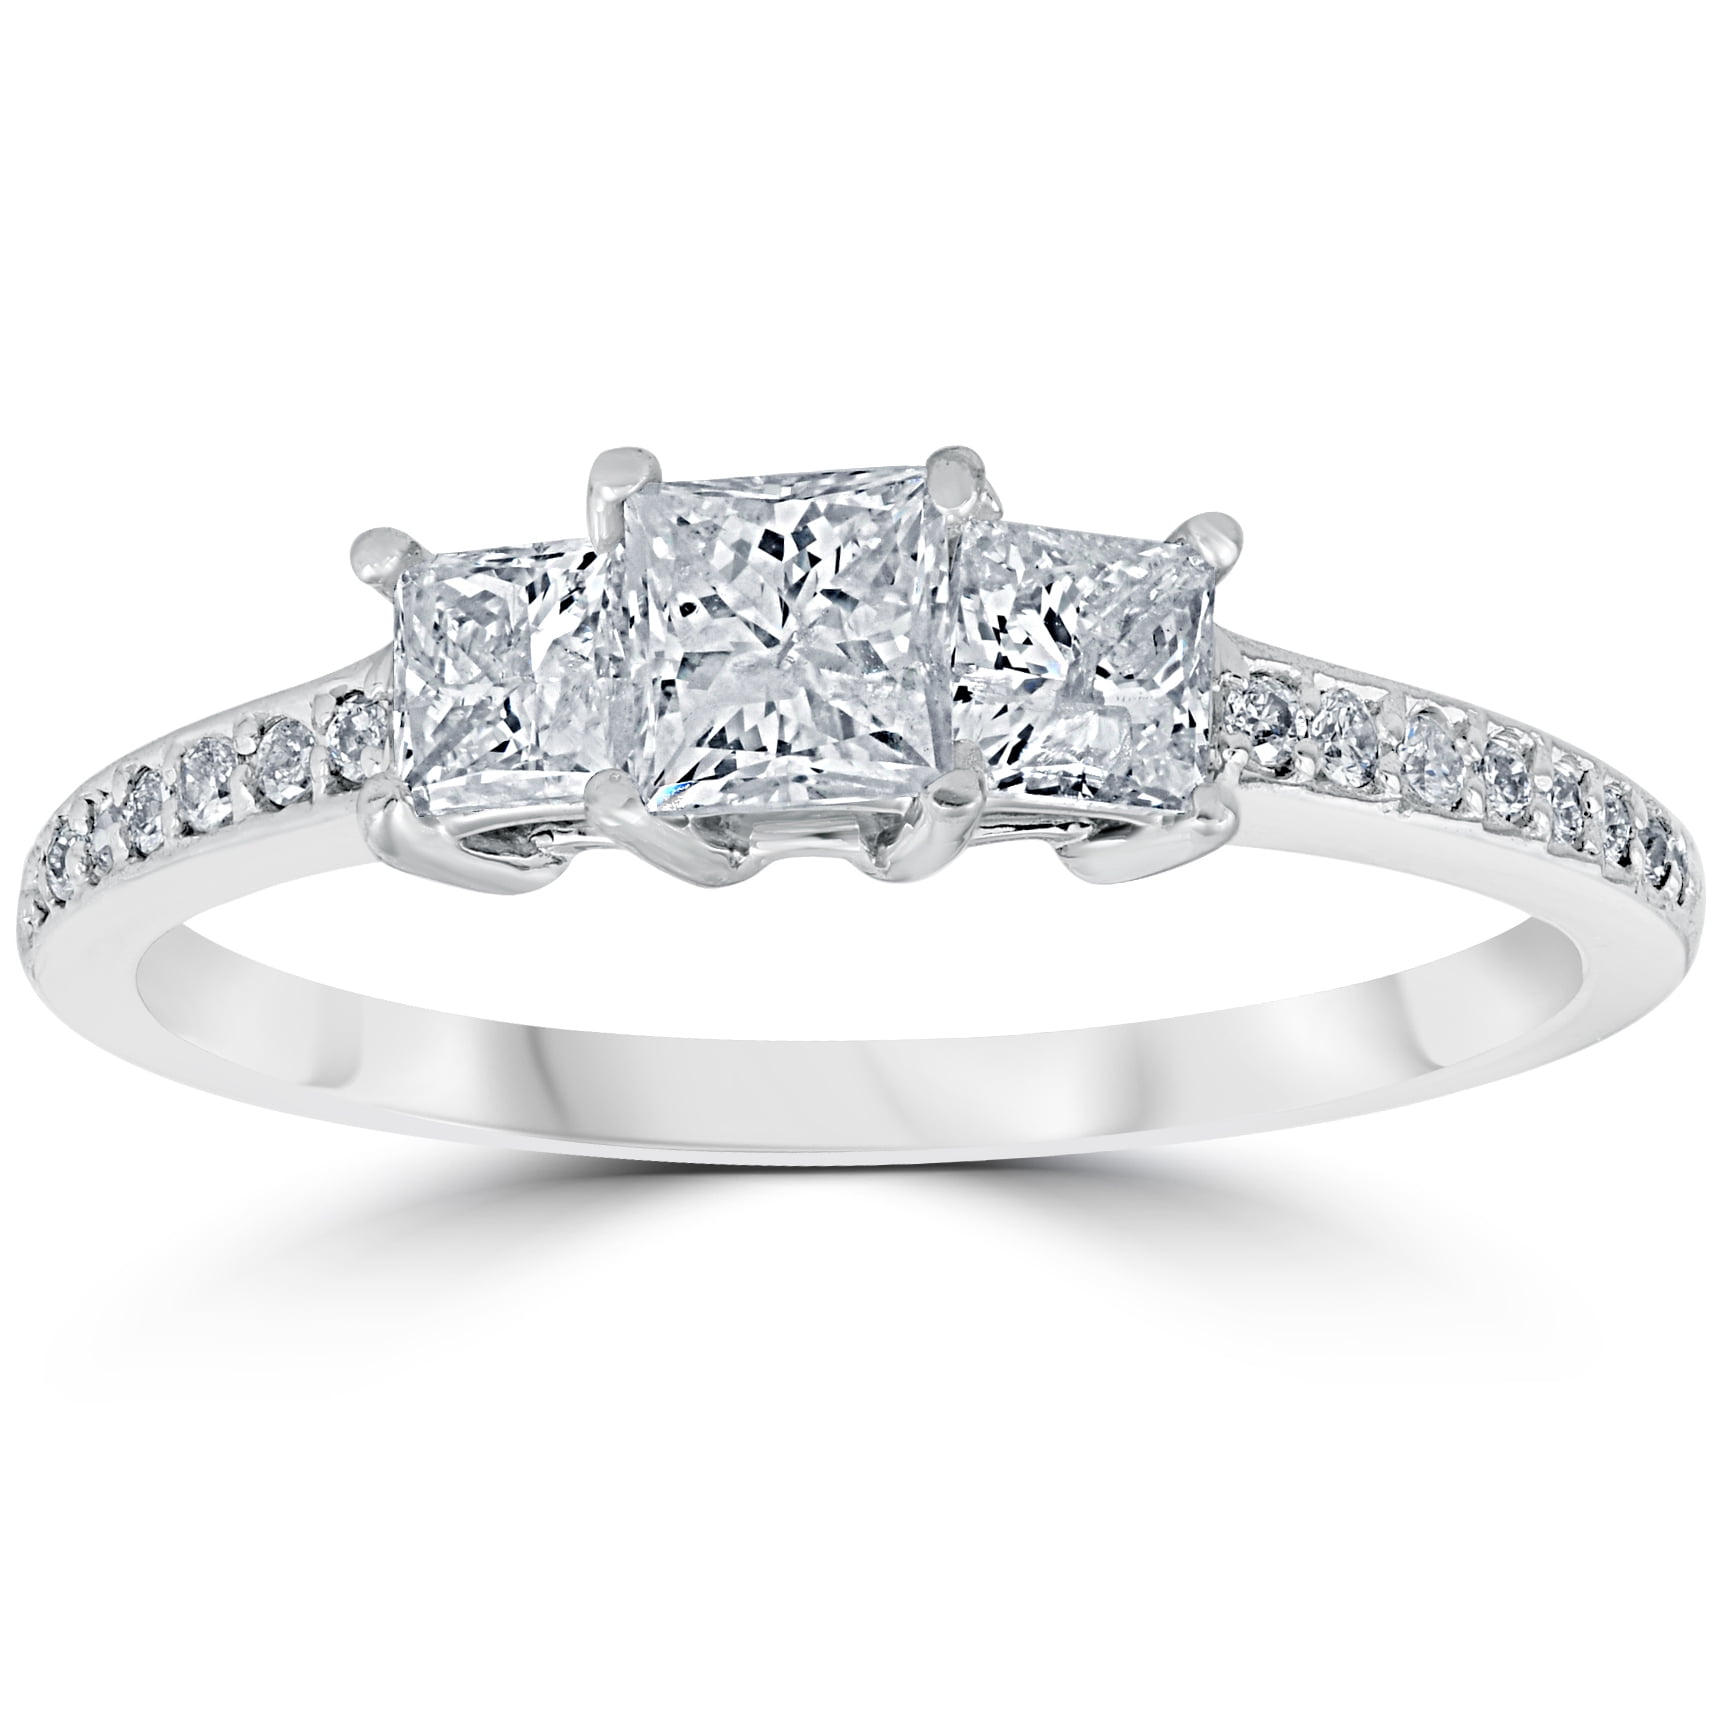 2.40 CT PRINCESS BRILLIANT CUT  ENGAGEMENT WEDDING RING SOLID 14K WHITE GOLD 